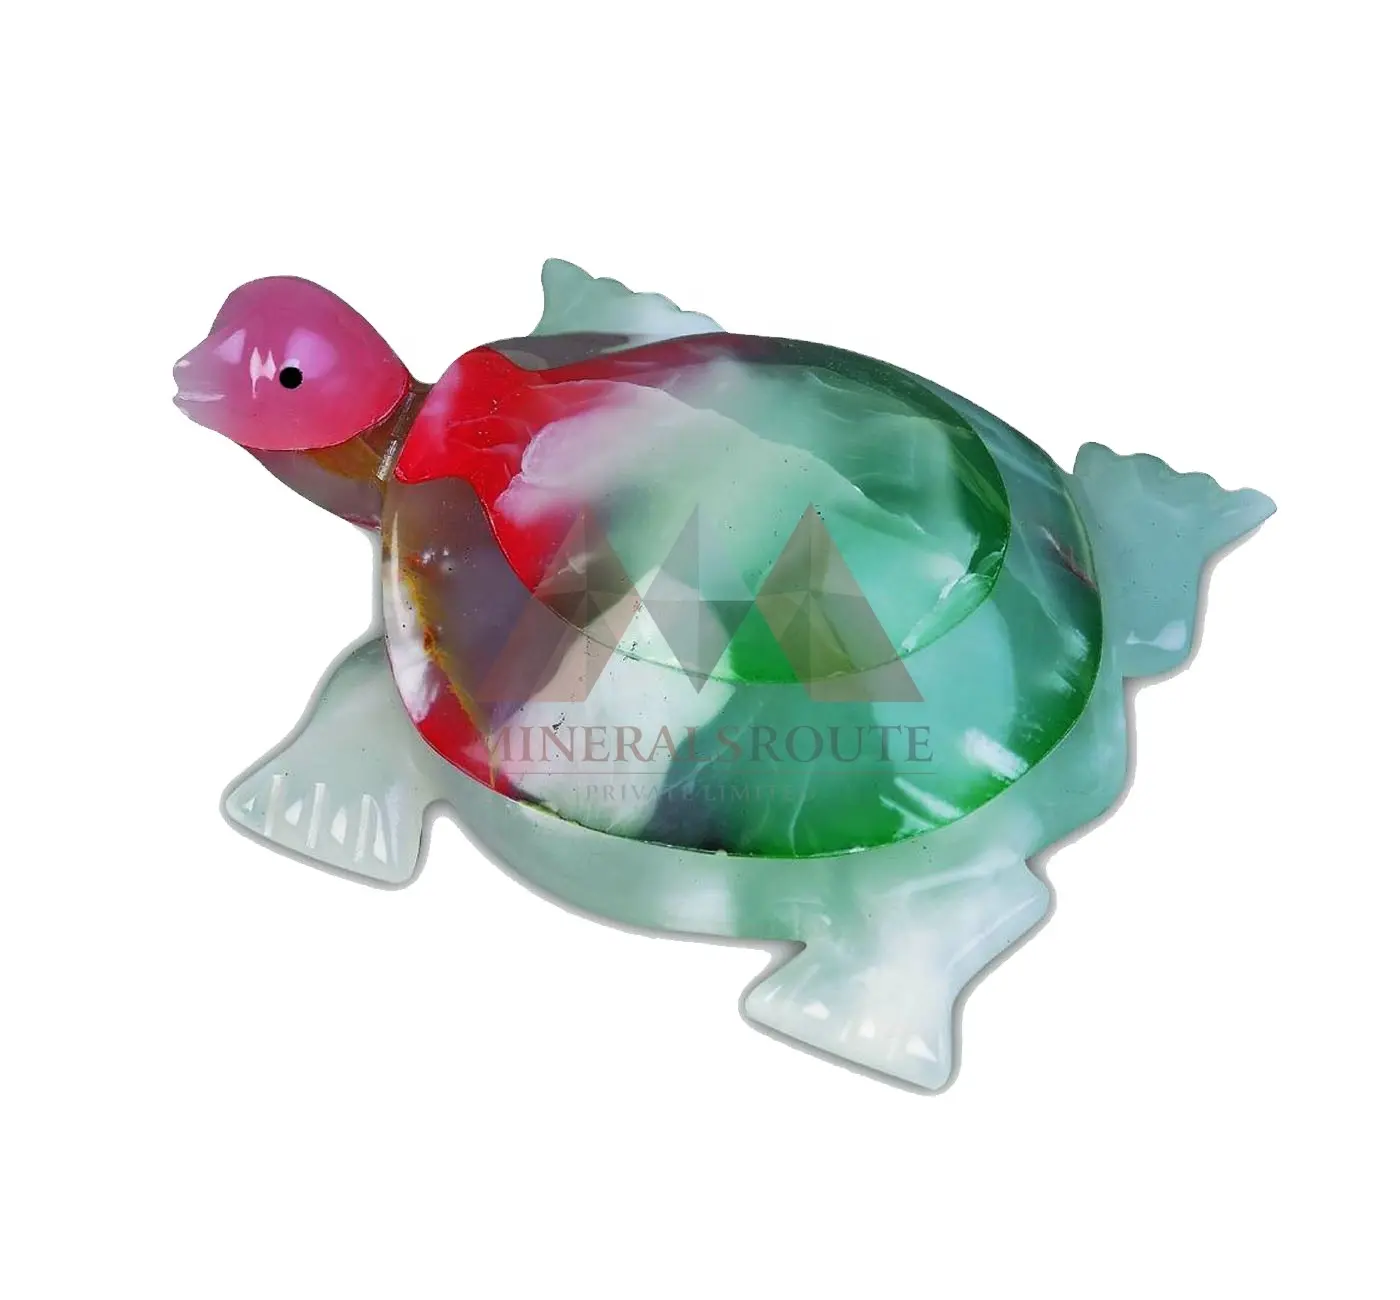 Good Quality Onyx Marble Turtle Figurines Available In All Size Size Multi Shaded Marble Turtle In Unique Designs